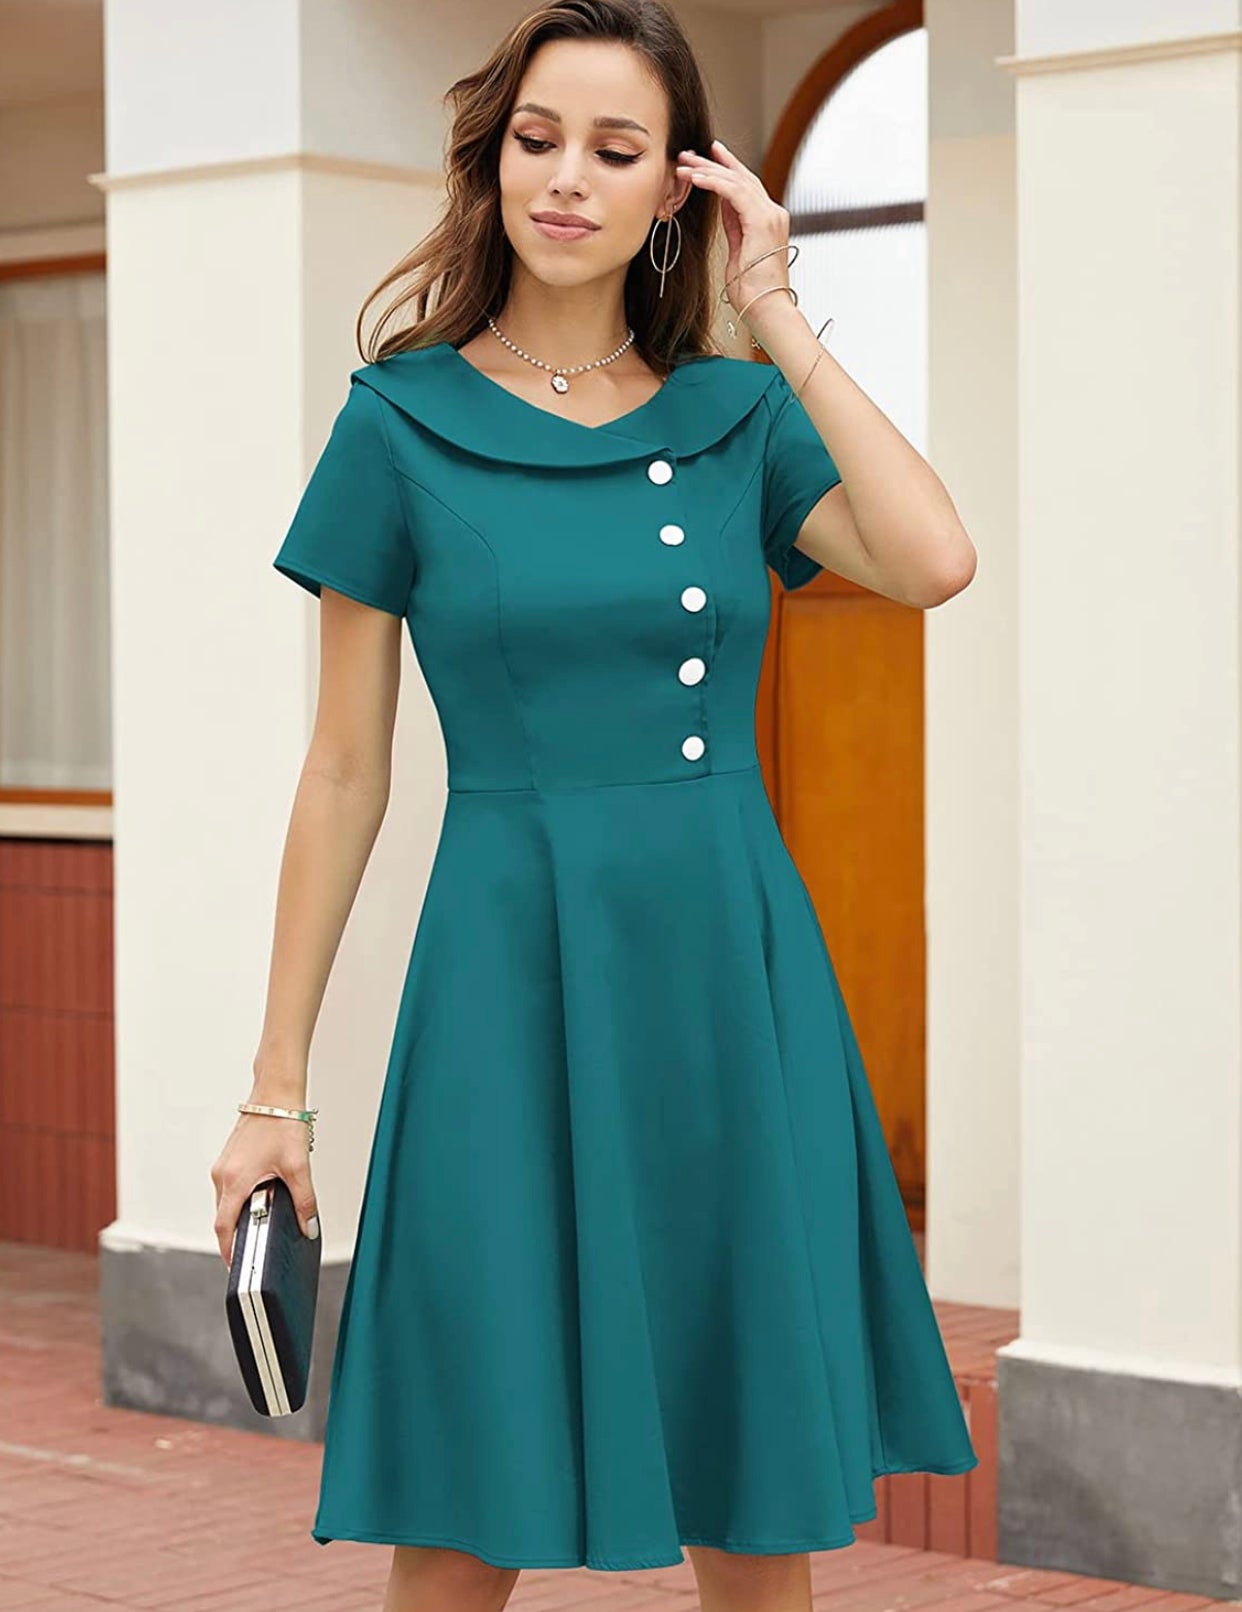 Peacock Green Audrey Style Swing Dress, Sizes XSmall - 3XLarge